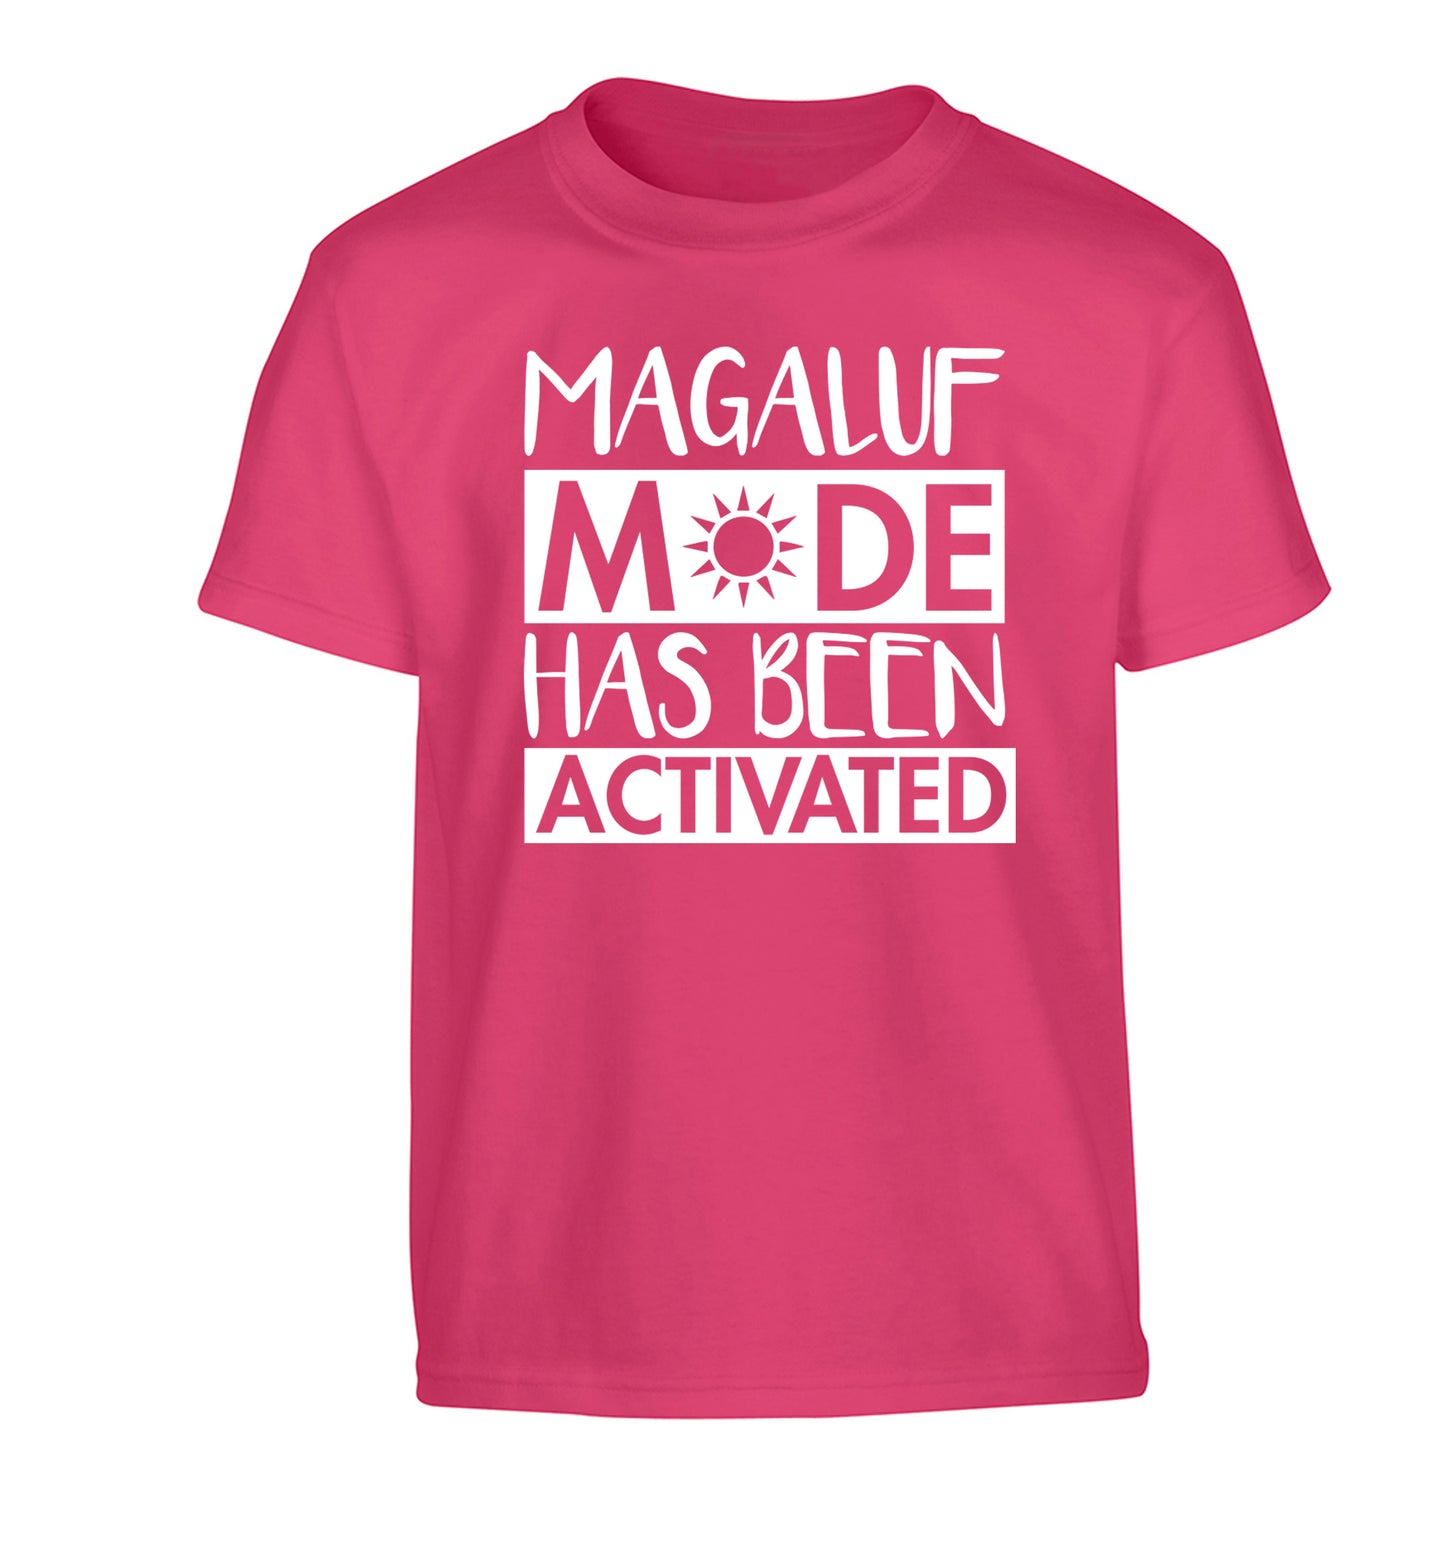 Magaluf mode has been activated Children's pink Tshirt 12-13 Years